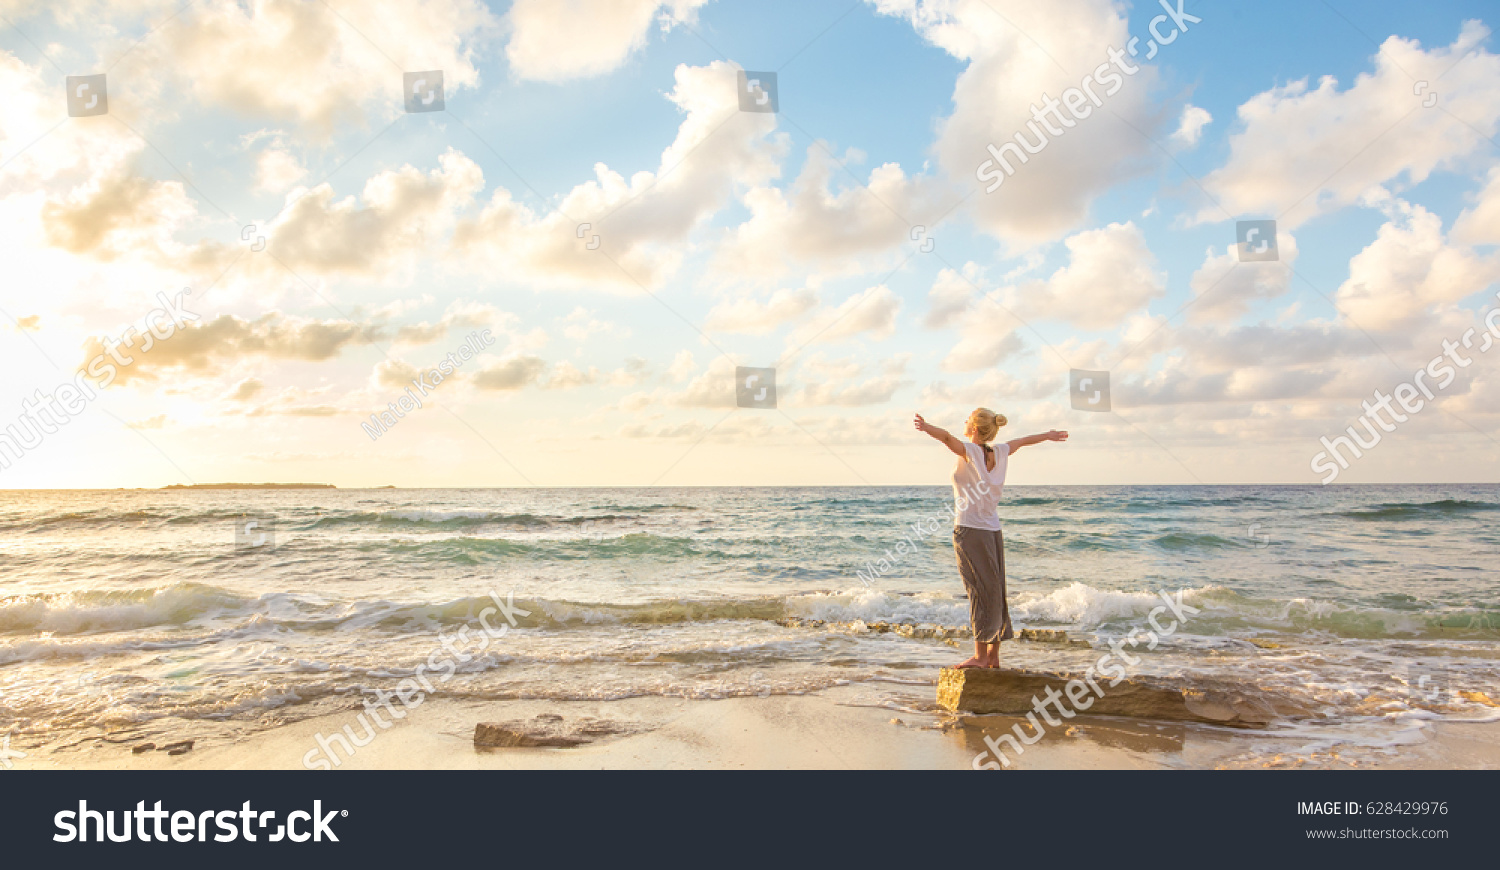 Relaxed woman enjoying sun, freedom and life an beautiful beach in sunset. Young lady feeling free, relaxed and happy. Concept of vacations, freedom, happiness, enjoyment and well being. #628429976